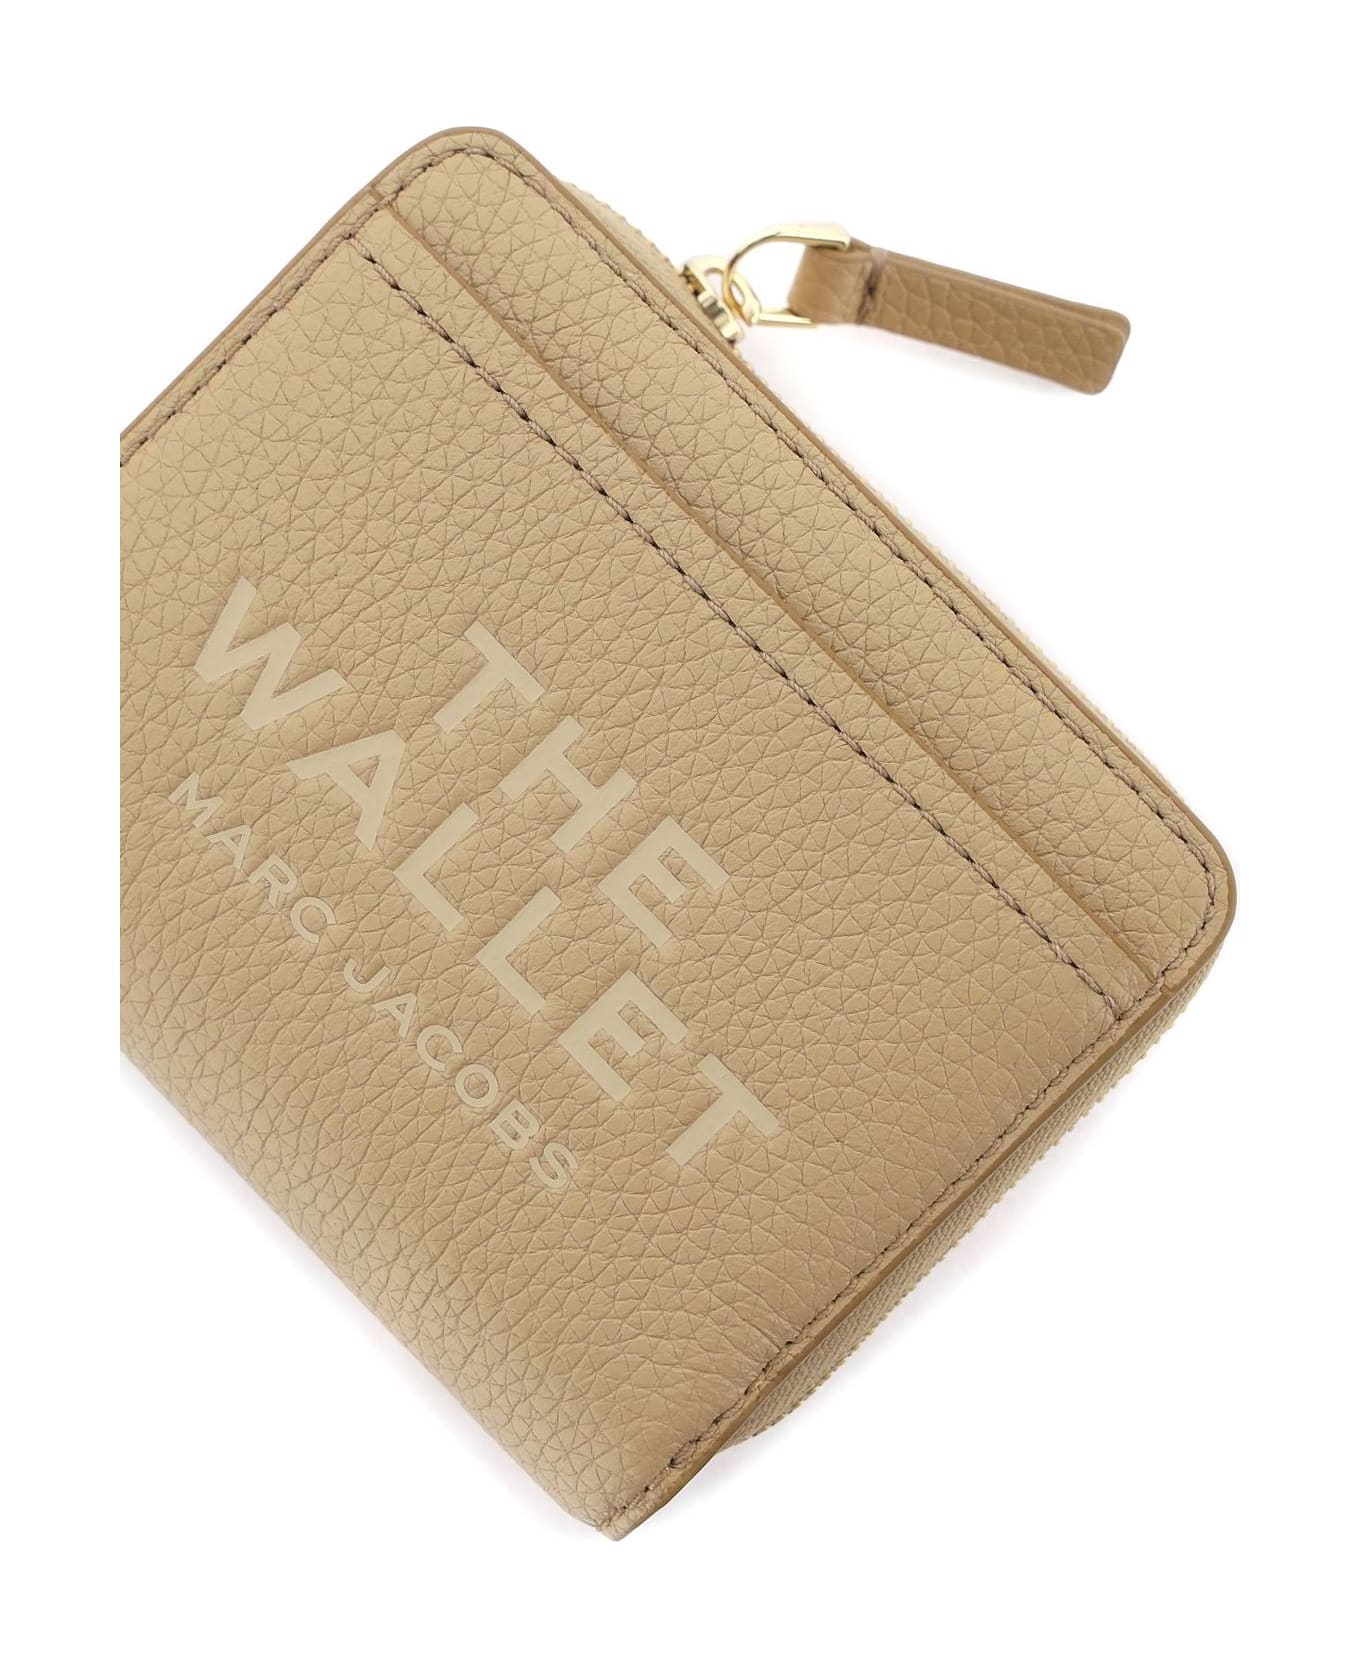 Marc Jacobs The Leather Mini Compact Wallet - CAMEL (Beige) 財布